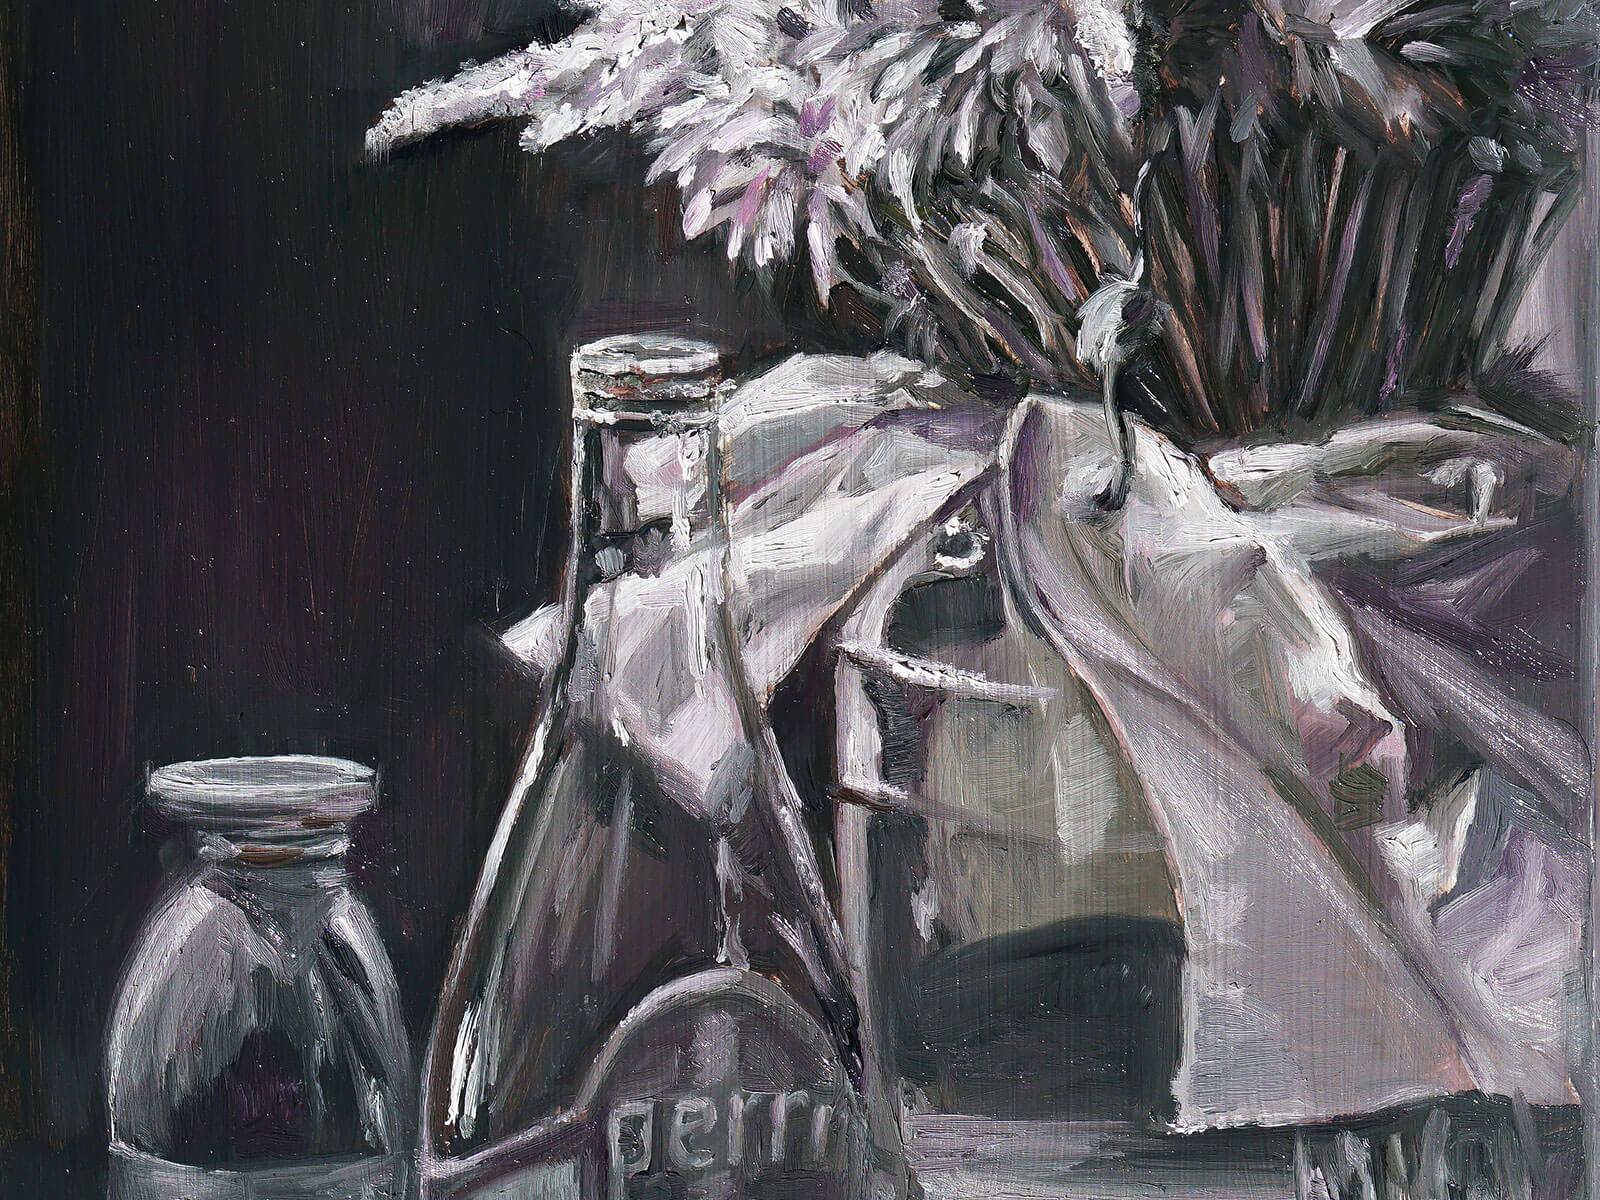 Still-life with a Perrier bottle and flowers in a glass jug